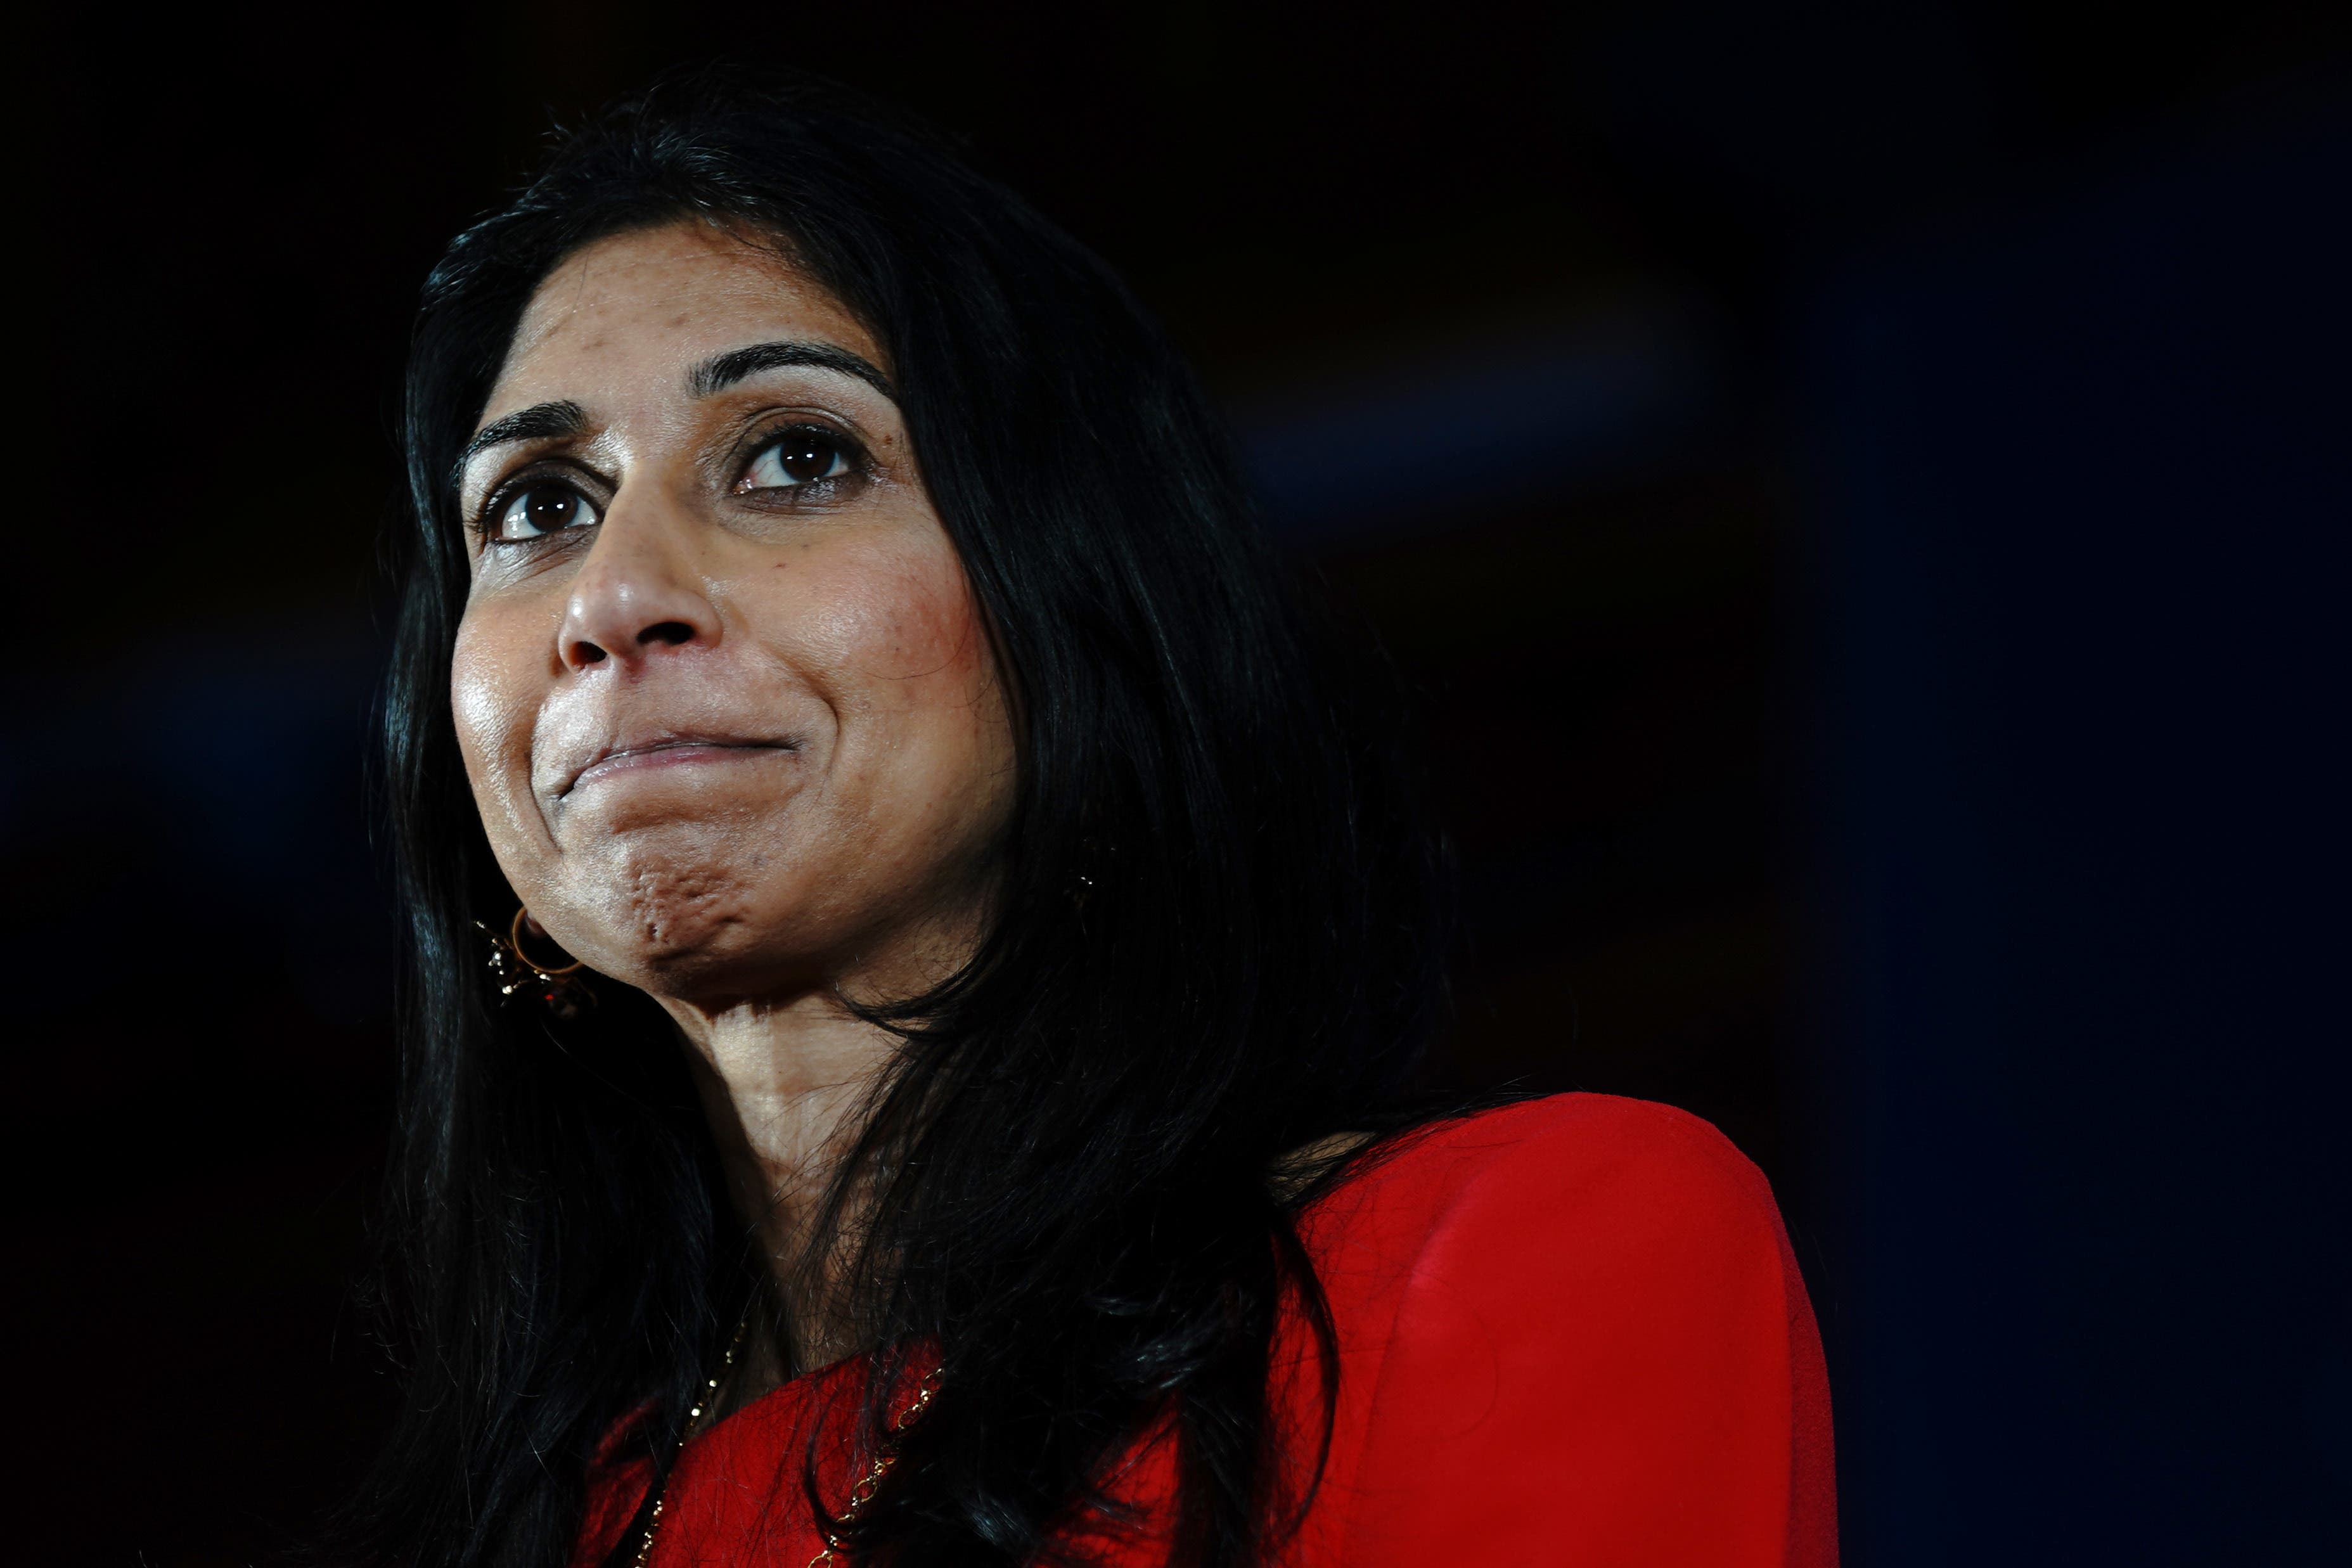 Home secretary Suella Braverman is said to have asked civil servants to help her avoid taking a speed awareness course with members of the public